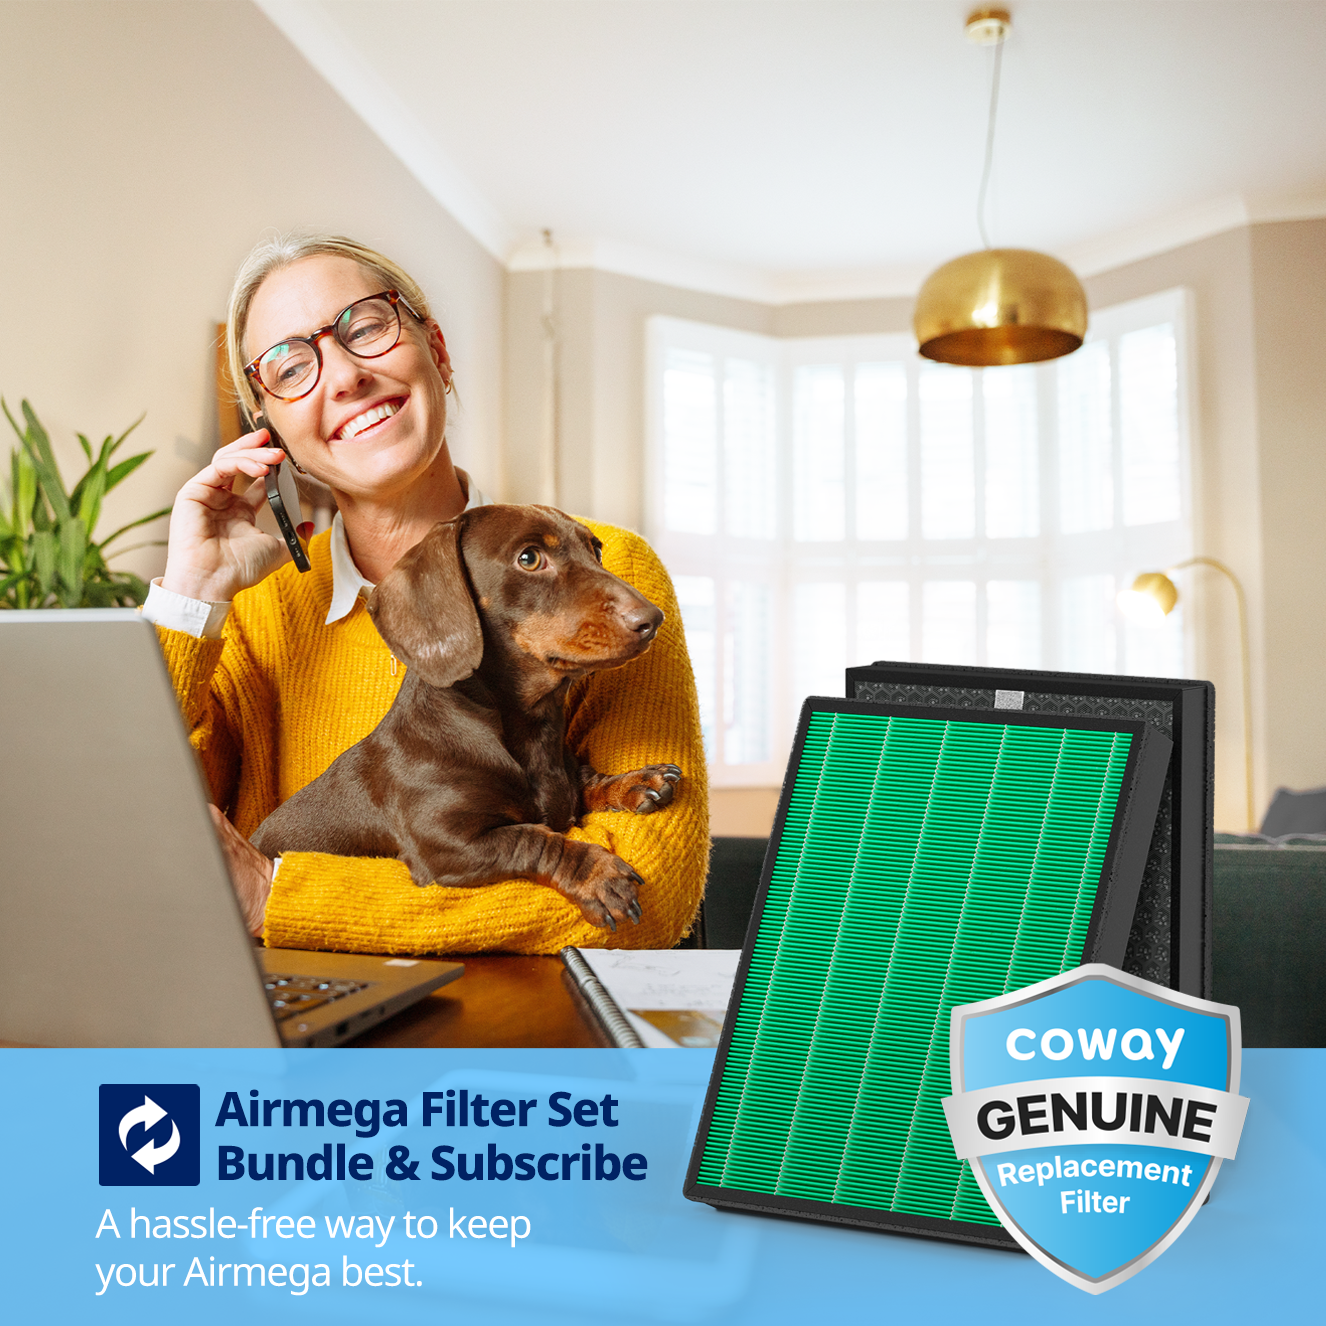 Airmega Filter Set Bundle & Subscribe: A hassle-free way to keep your Airmega best.